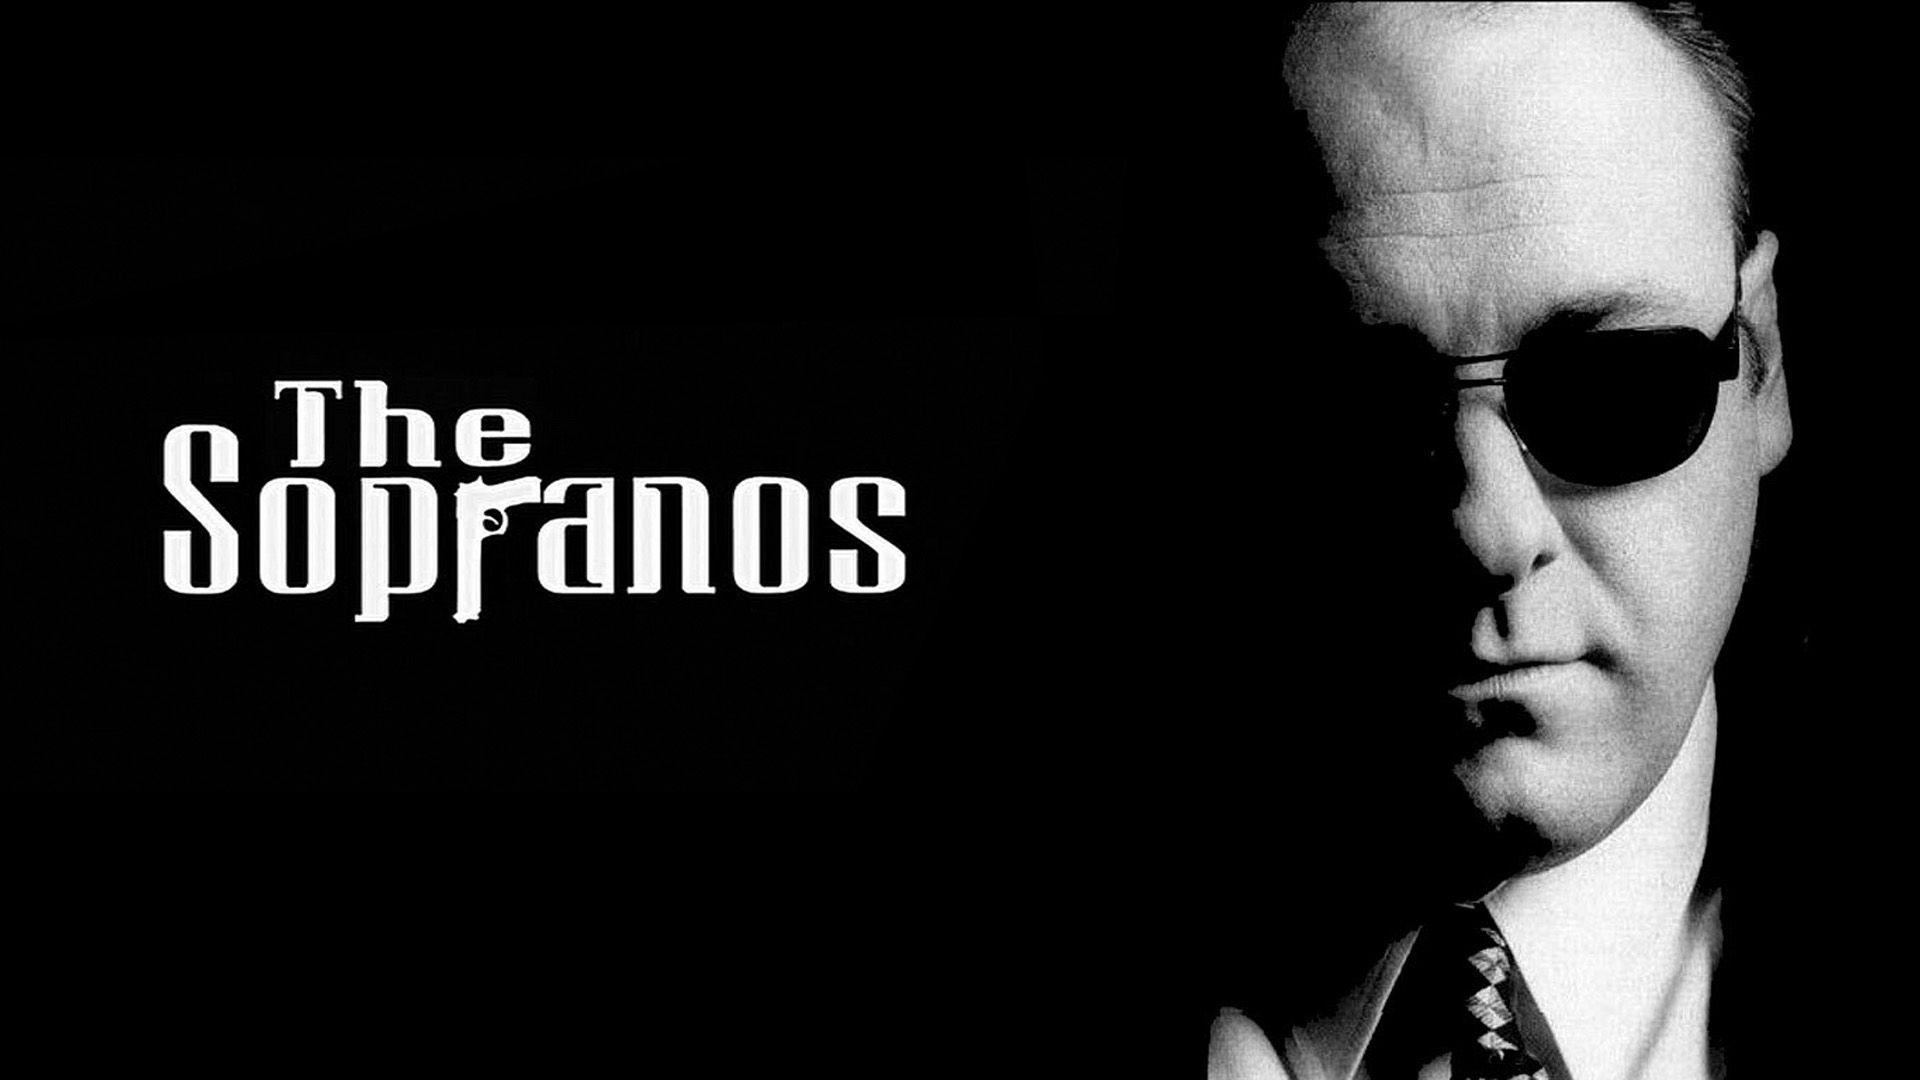 The Sopranos wallpapers 12